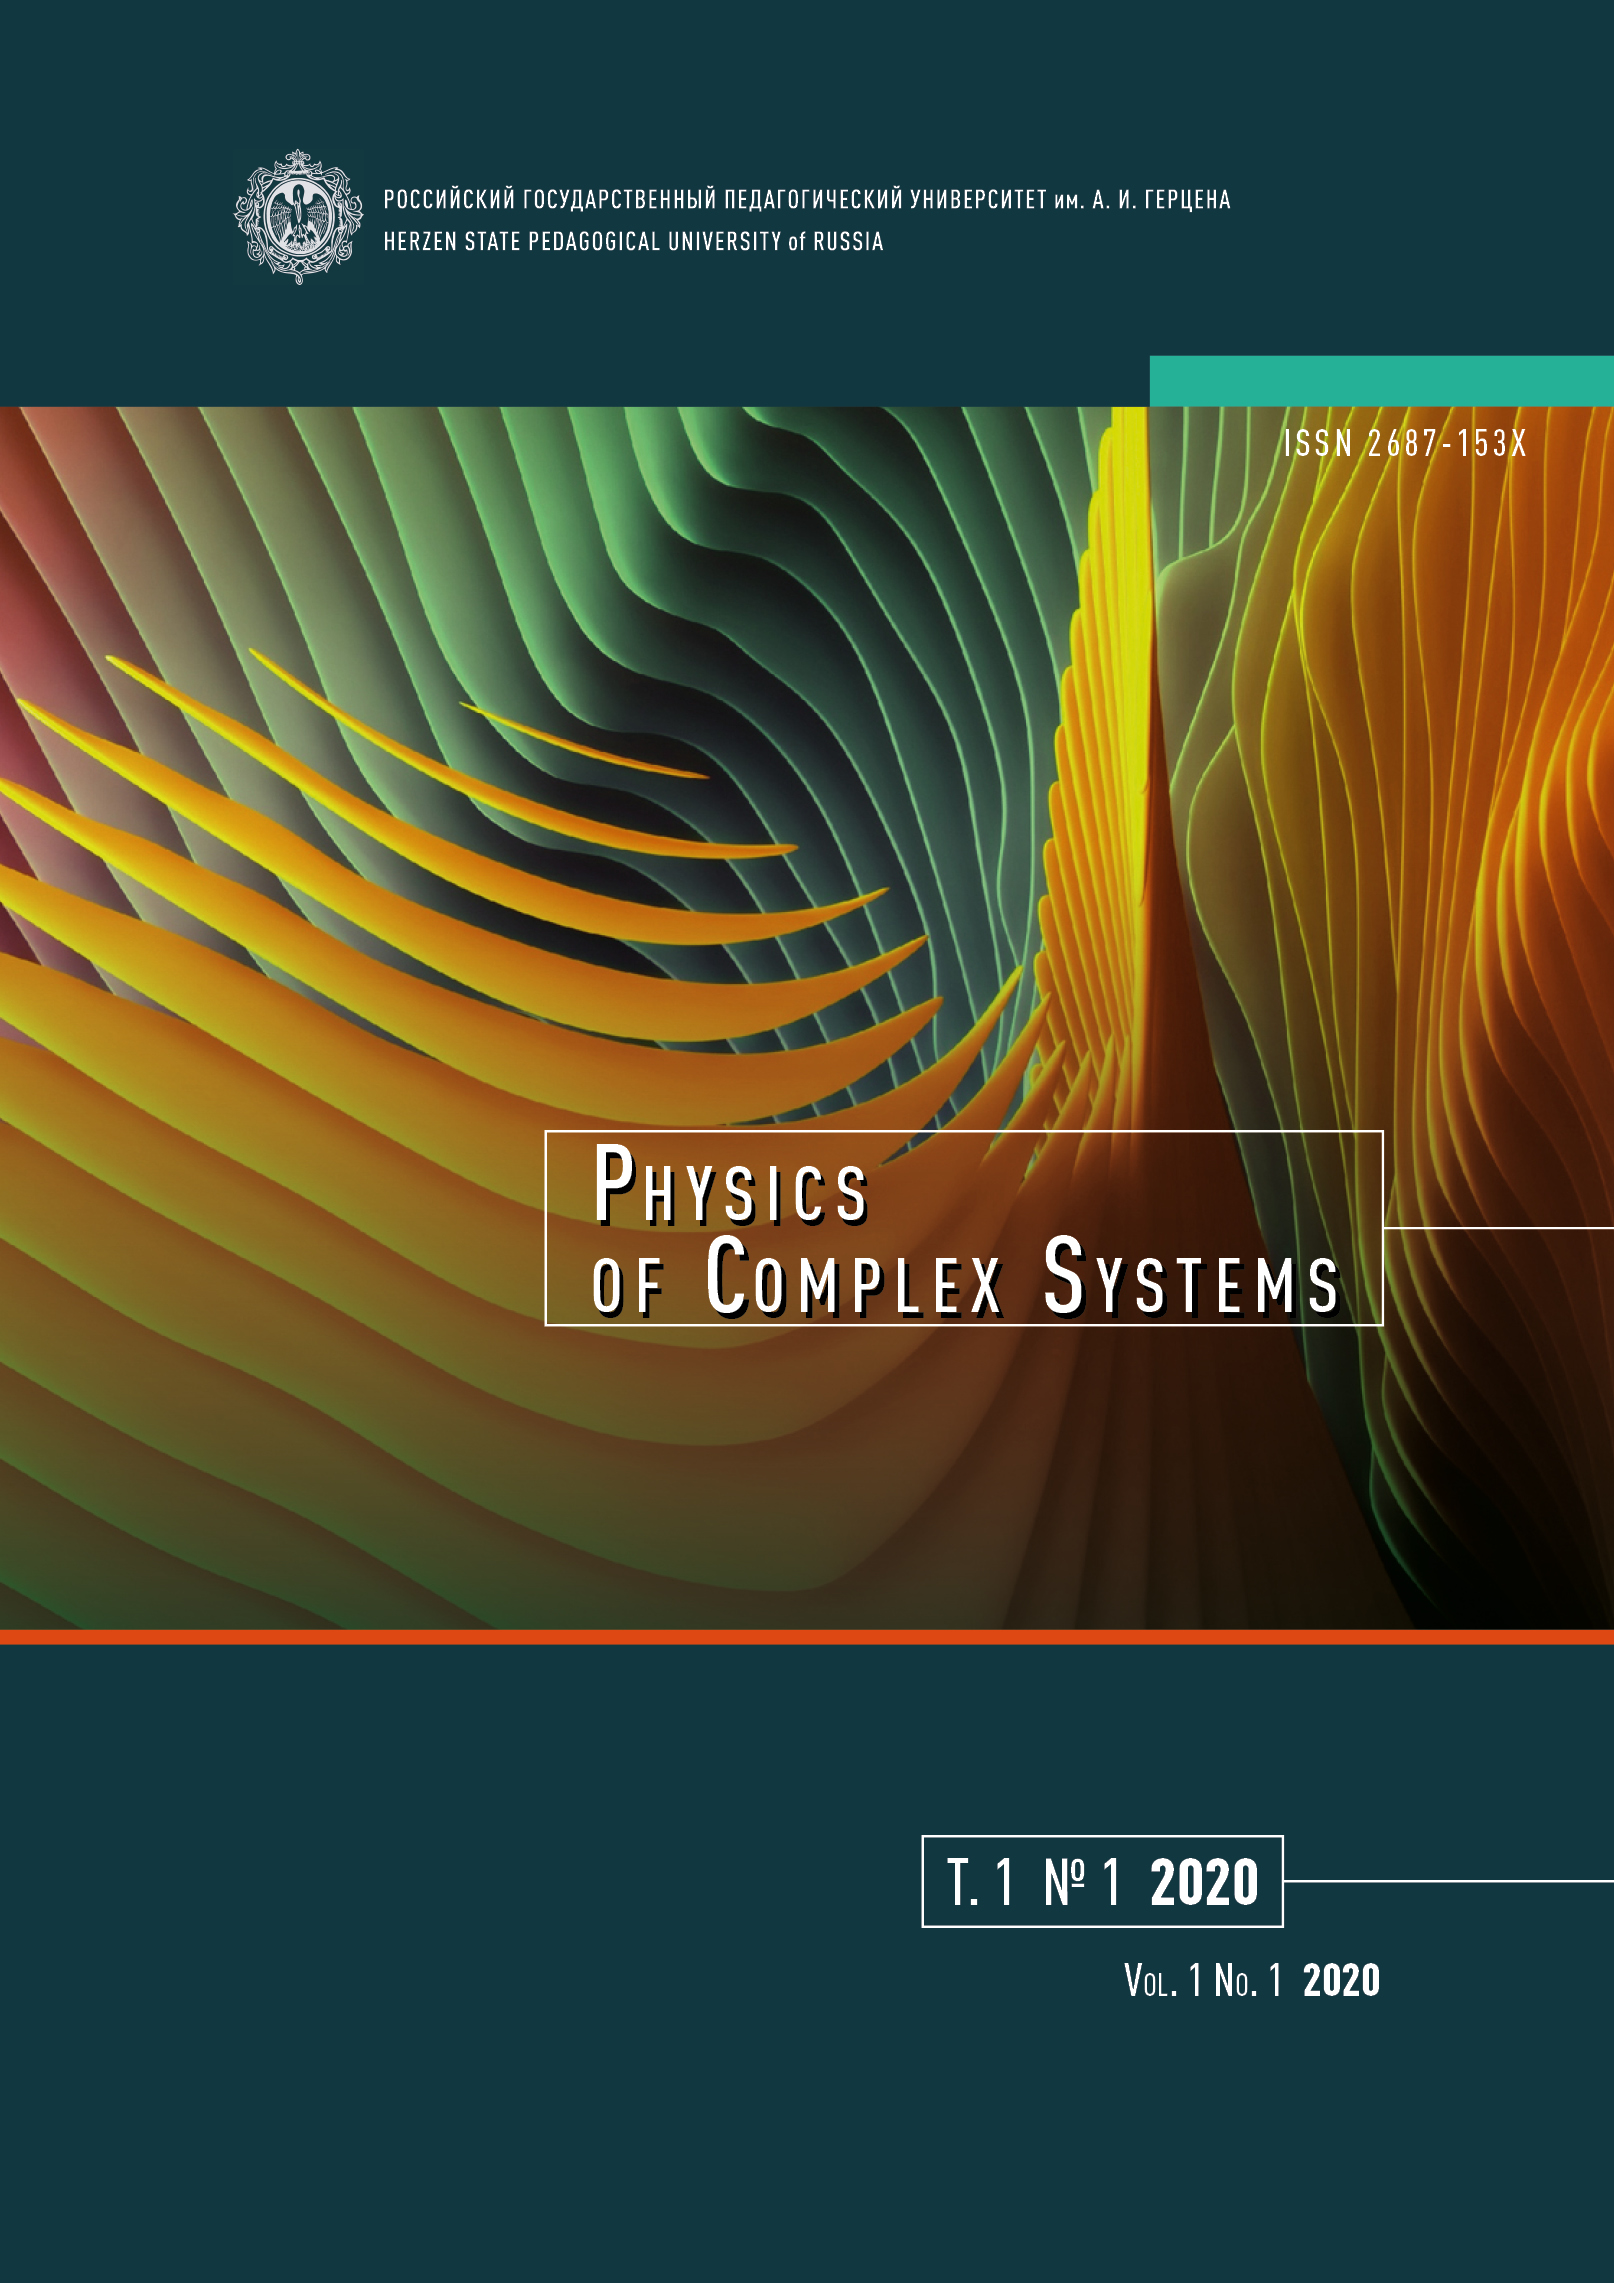 Cover of the journal "Physics of Complex Systems" (vol. 1, no. 1)